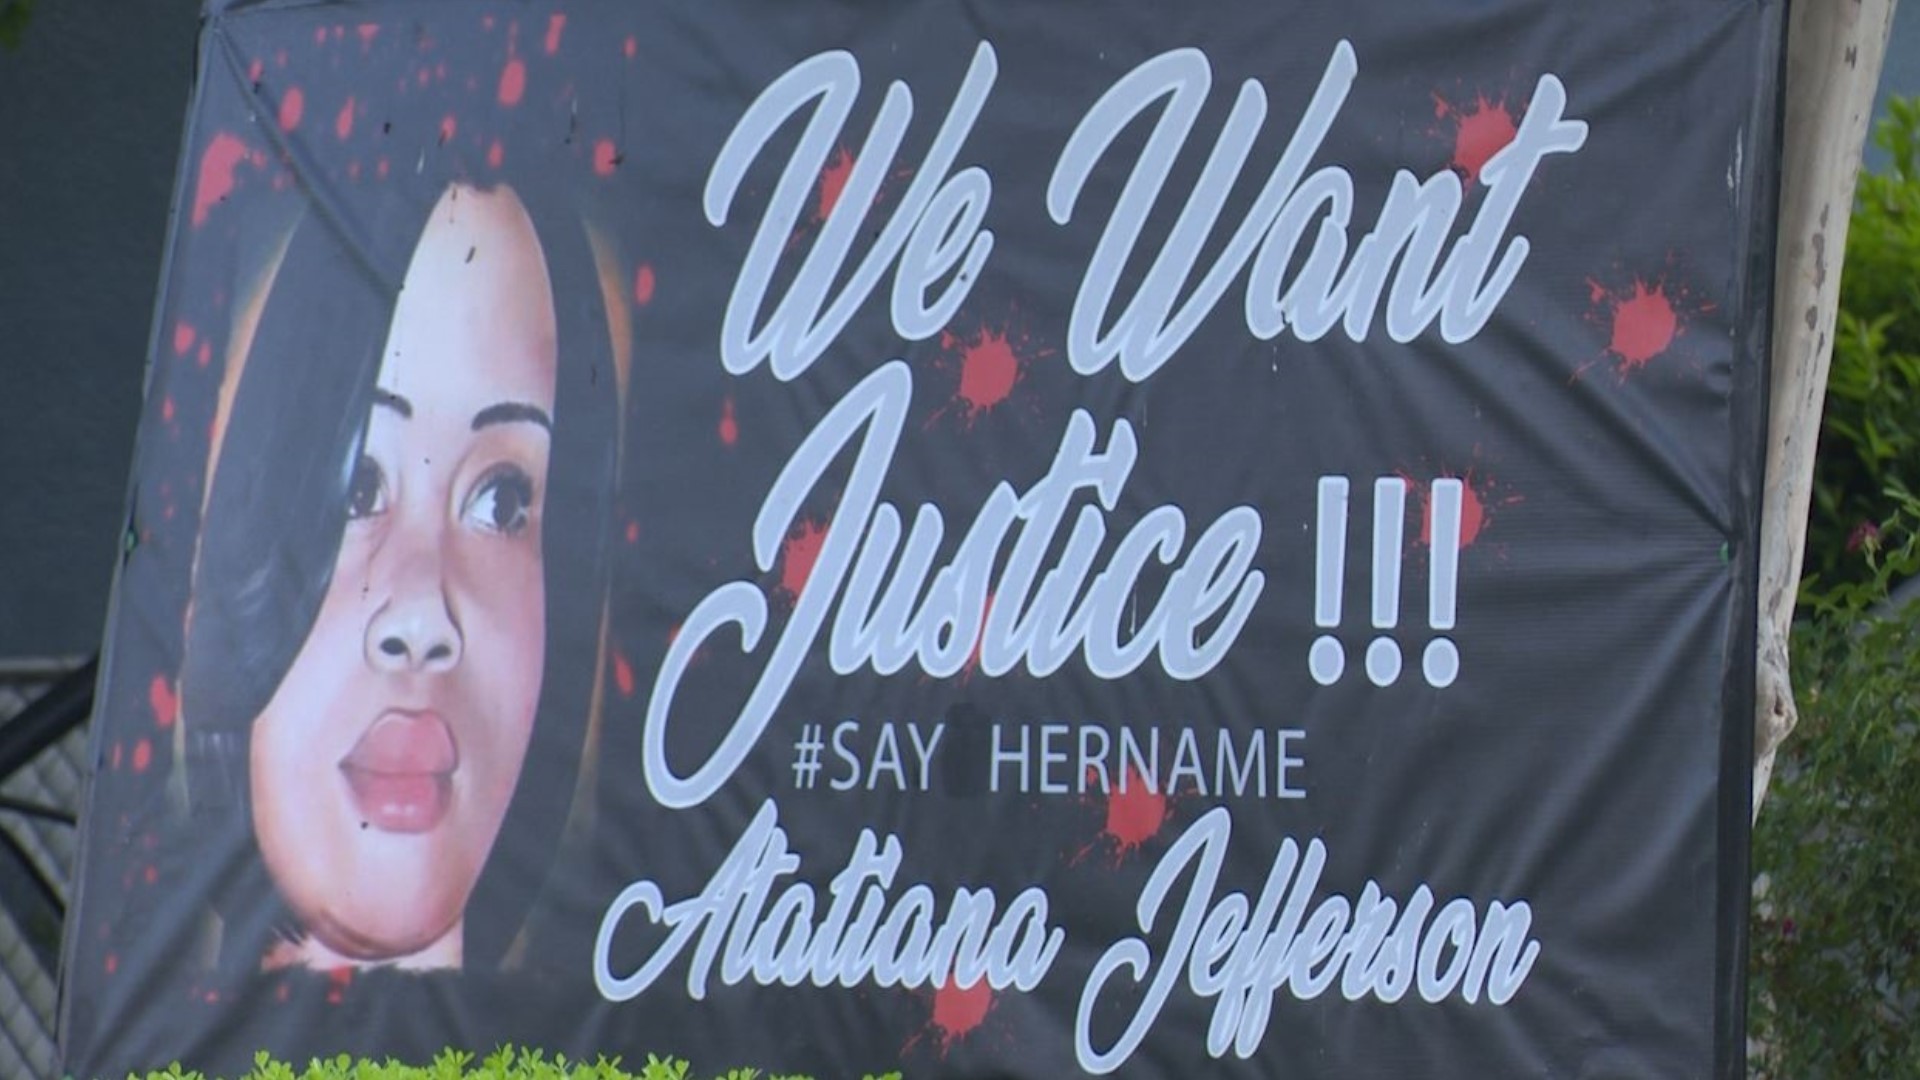 As family and friends of Atatiana Jefferson continue to wait for justice, many are gathering to remember her and celebrate what she meant to those who knew her.